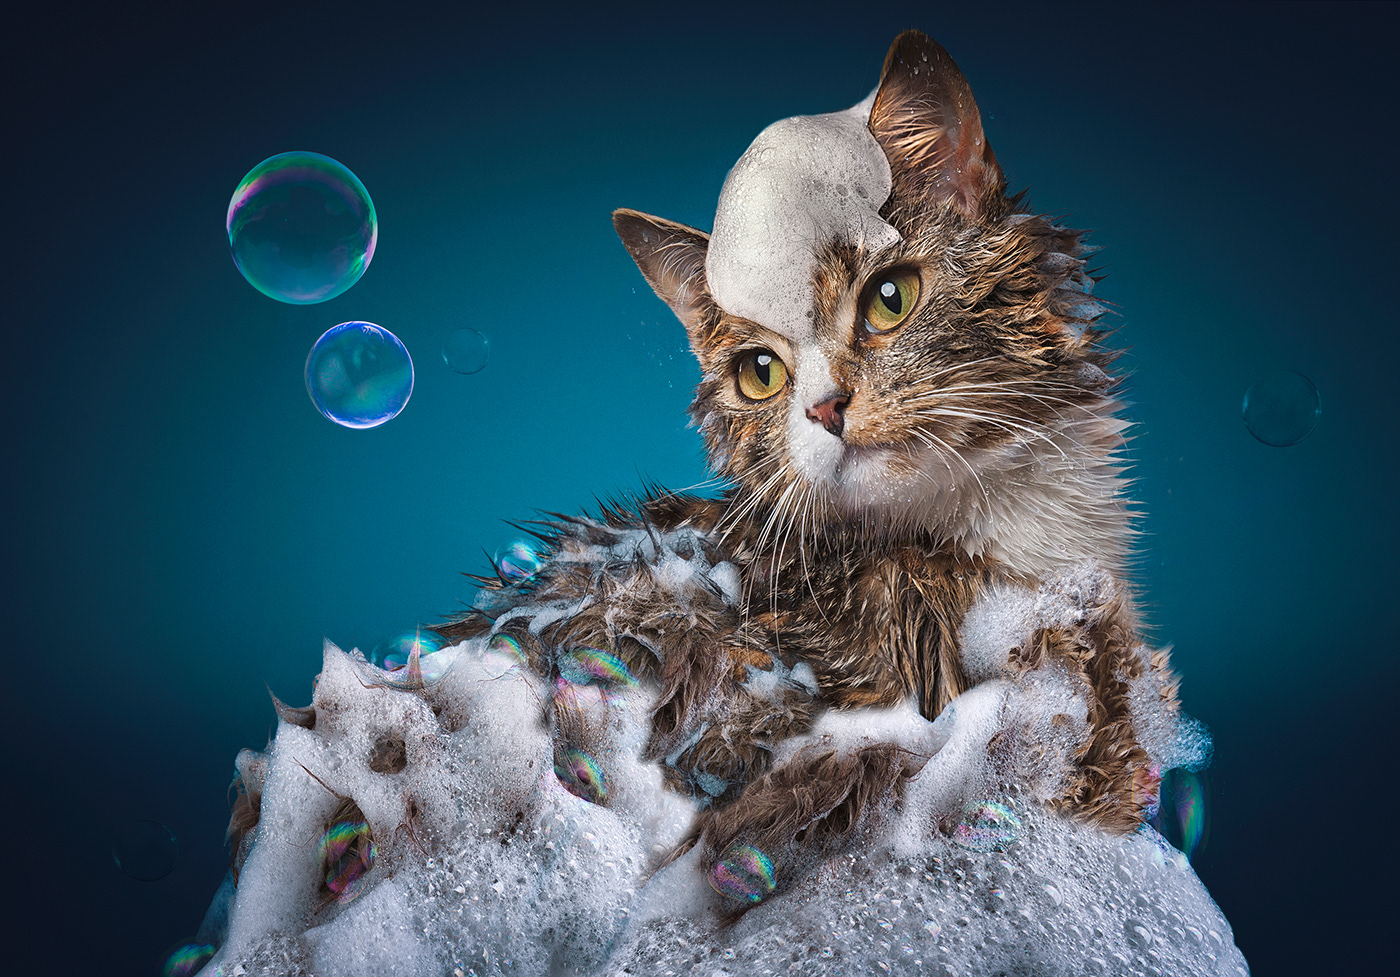 campaign animals Hearing Aids hearing cats Wet cats pets Commercial Photography photoshop Studio Photography